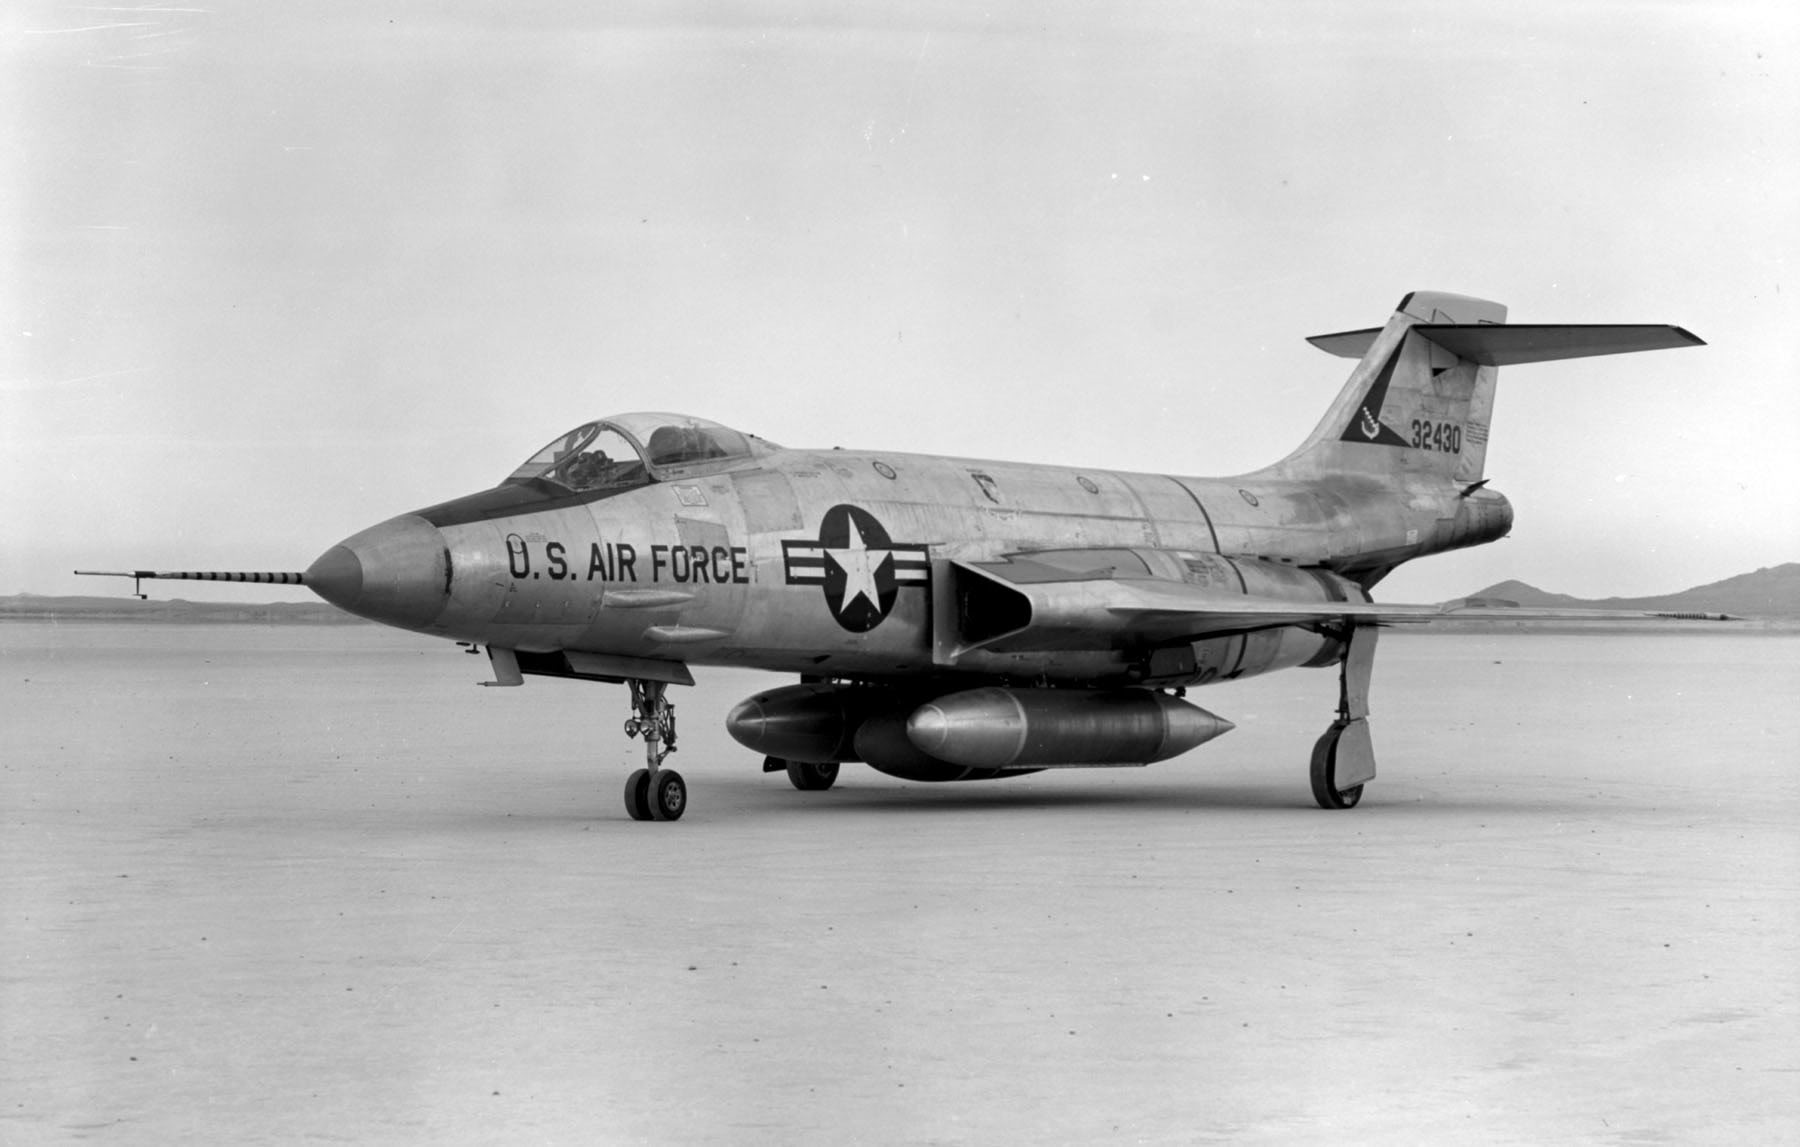 Amazing McDonnell F-101 Voodoo Pictures & Backgrounds